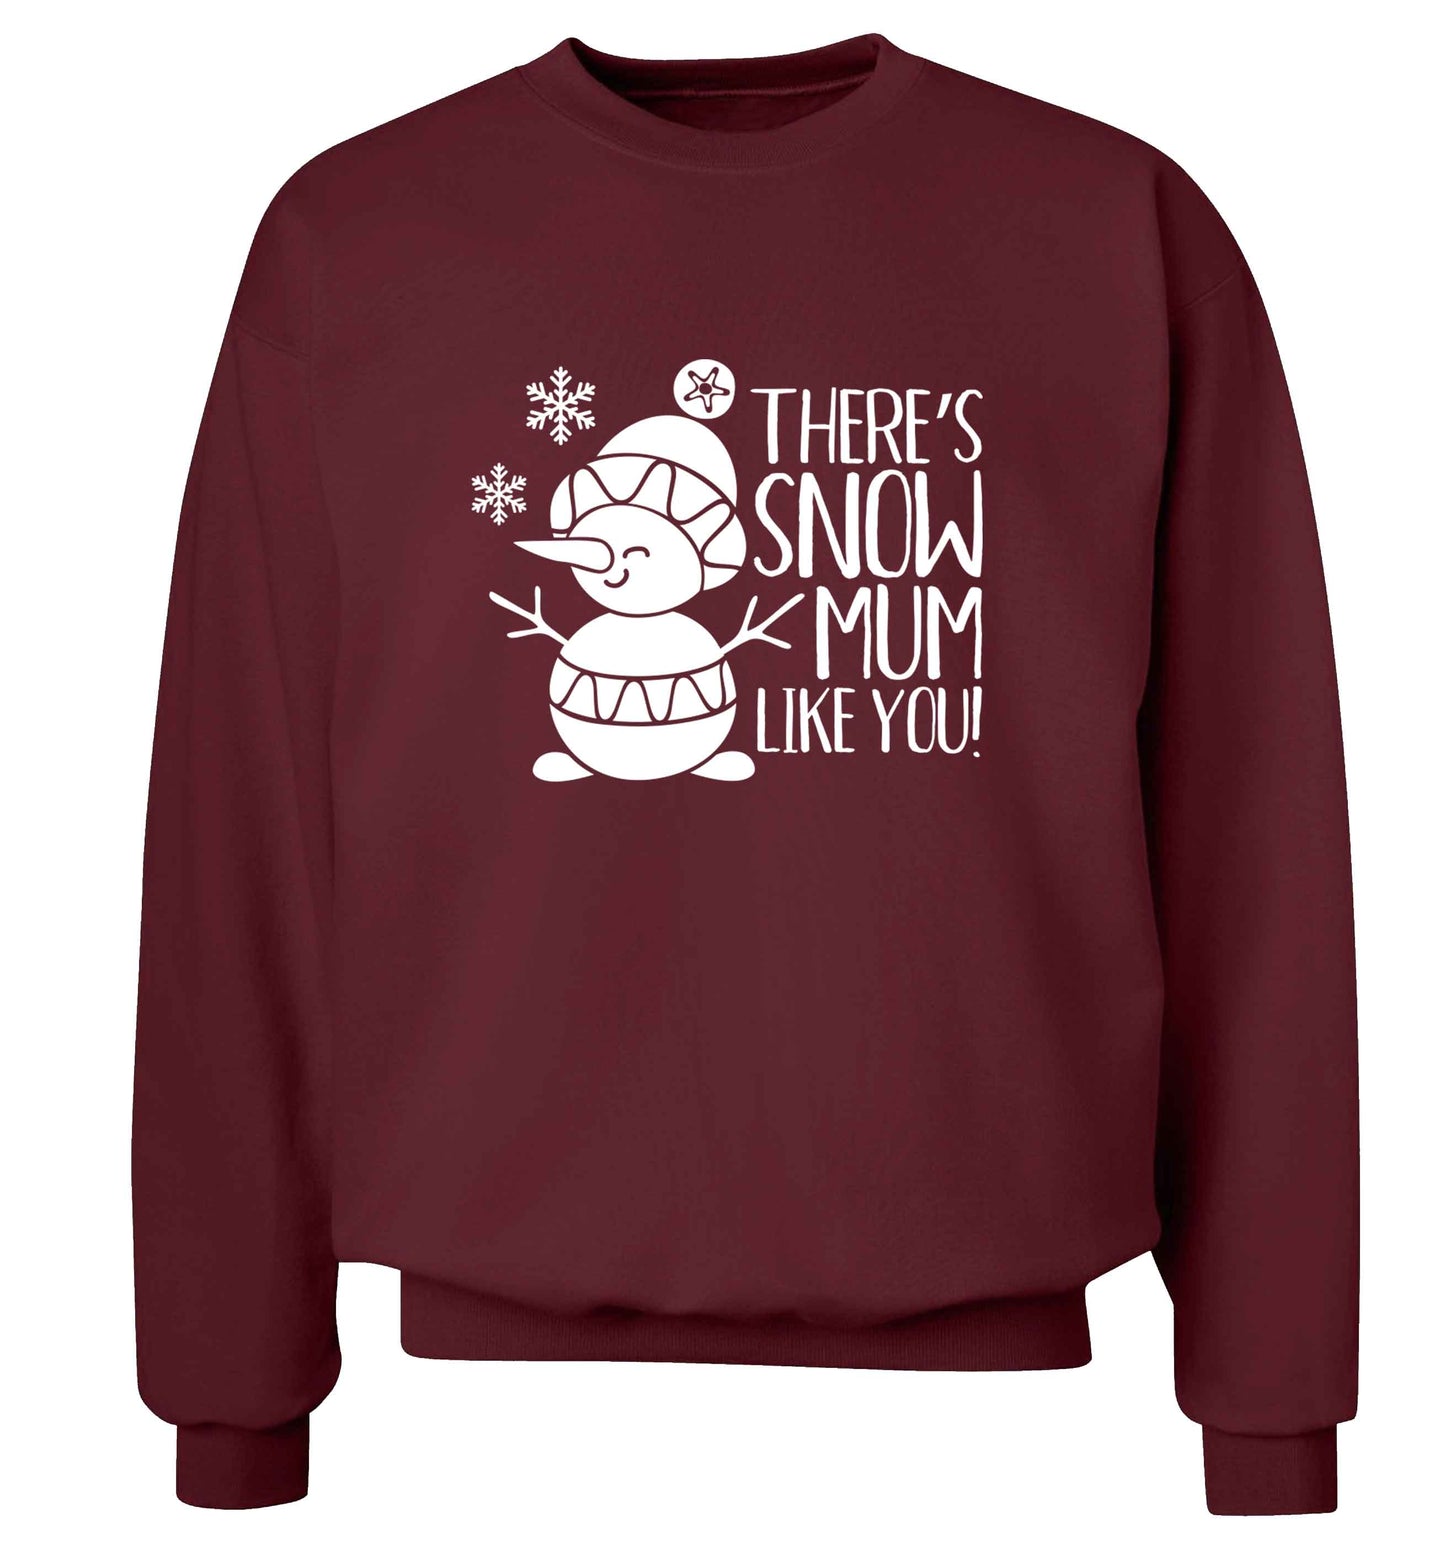 There's snow mum like you adult's unisex maroon sweater 2XL